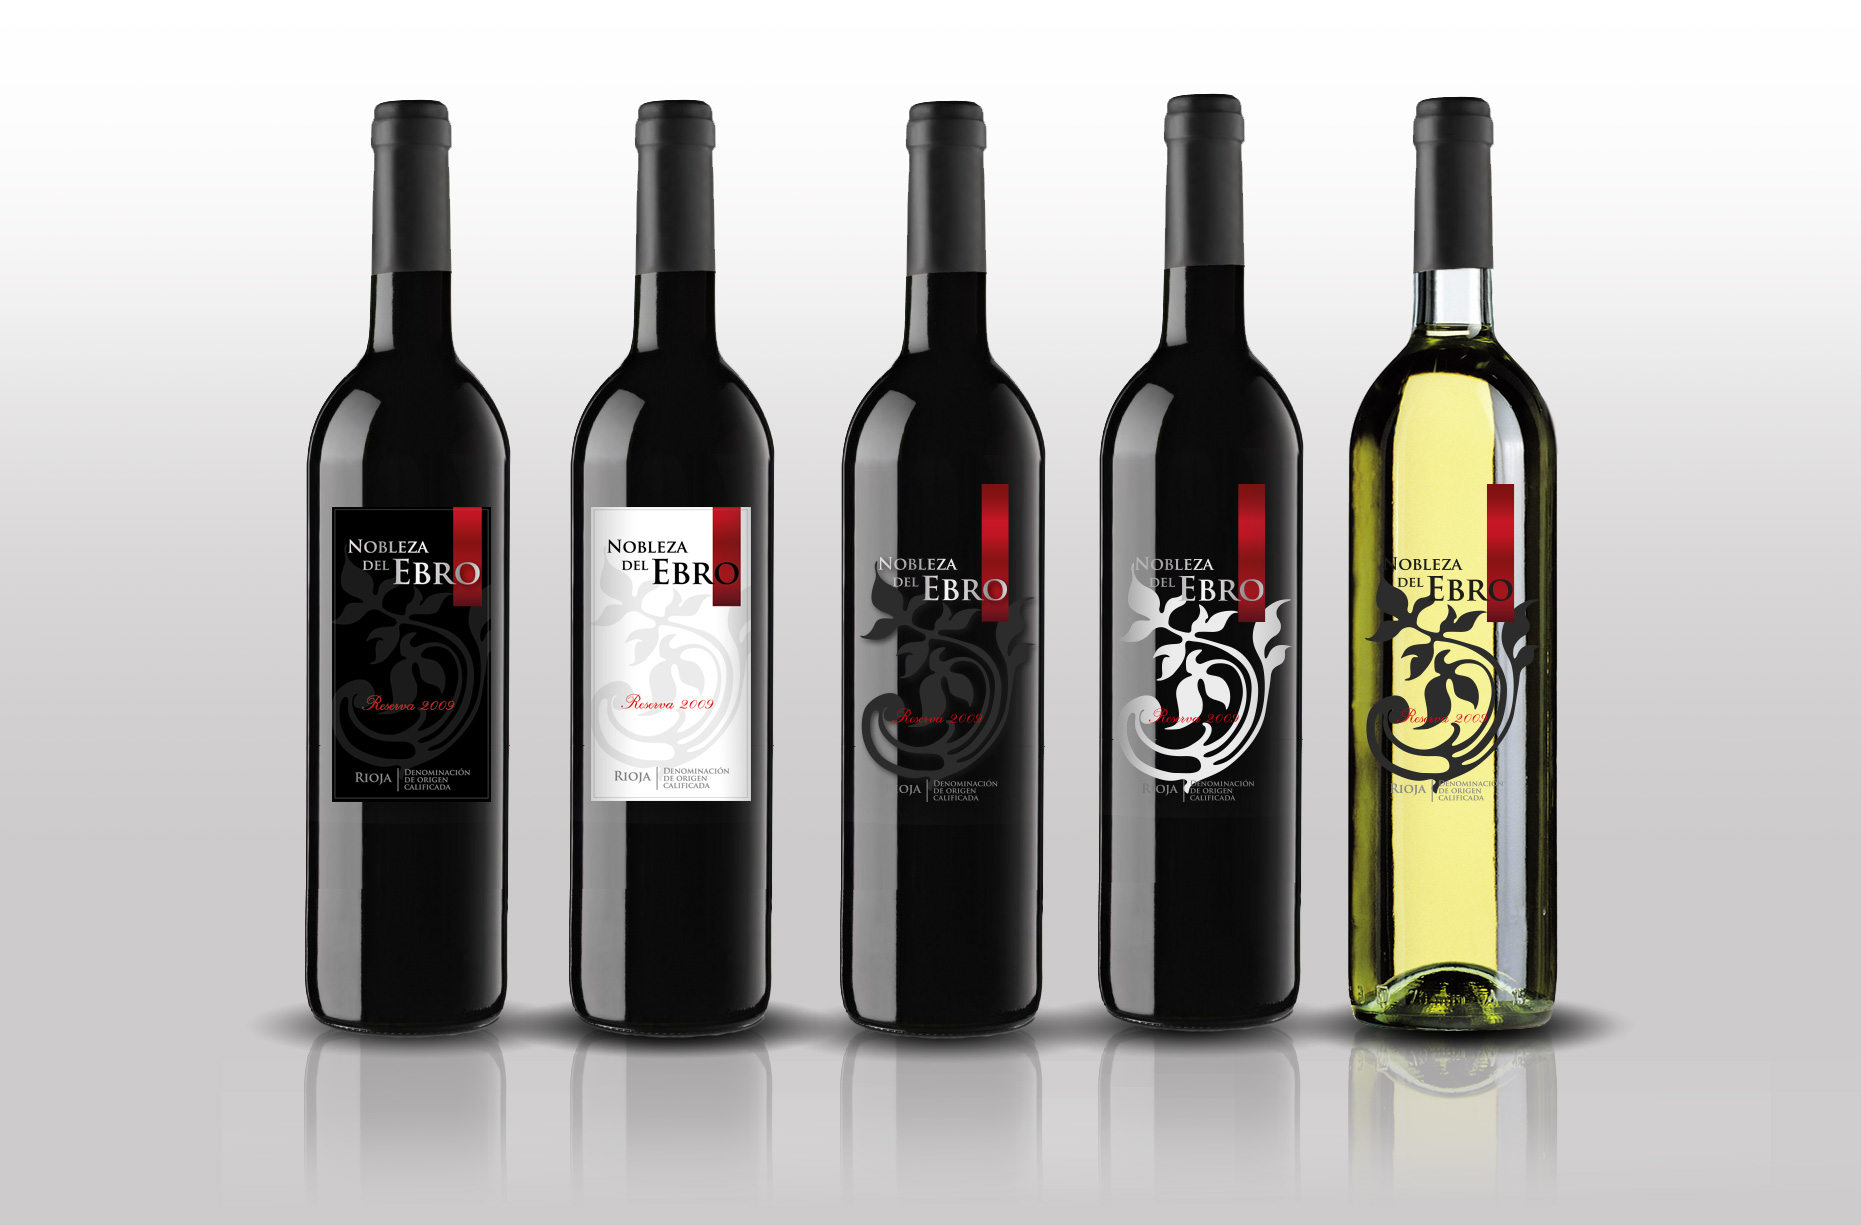 Portfolio of design works for the creation of logos, brands, catalogs, labels and packaging for a wine producing and bottling company